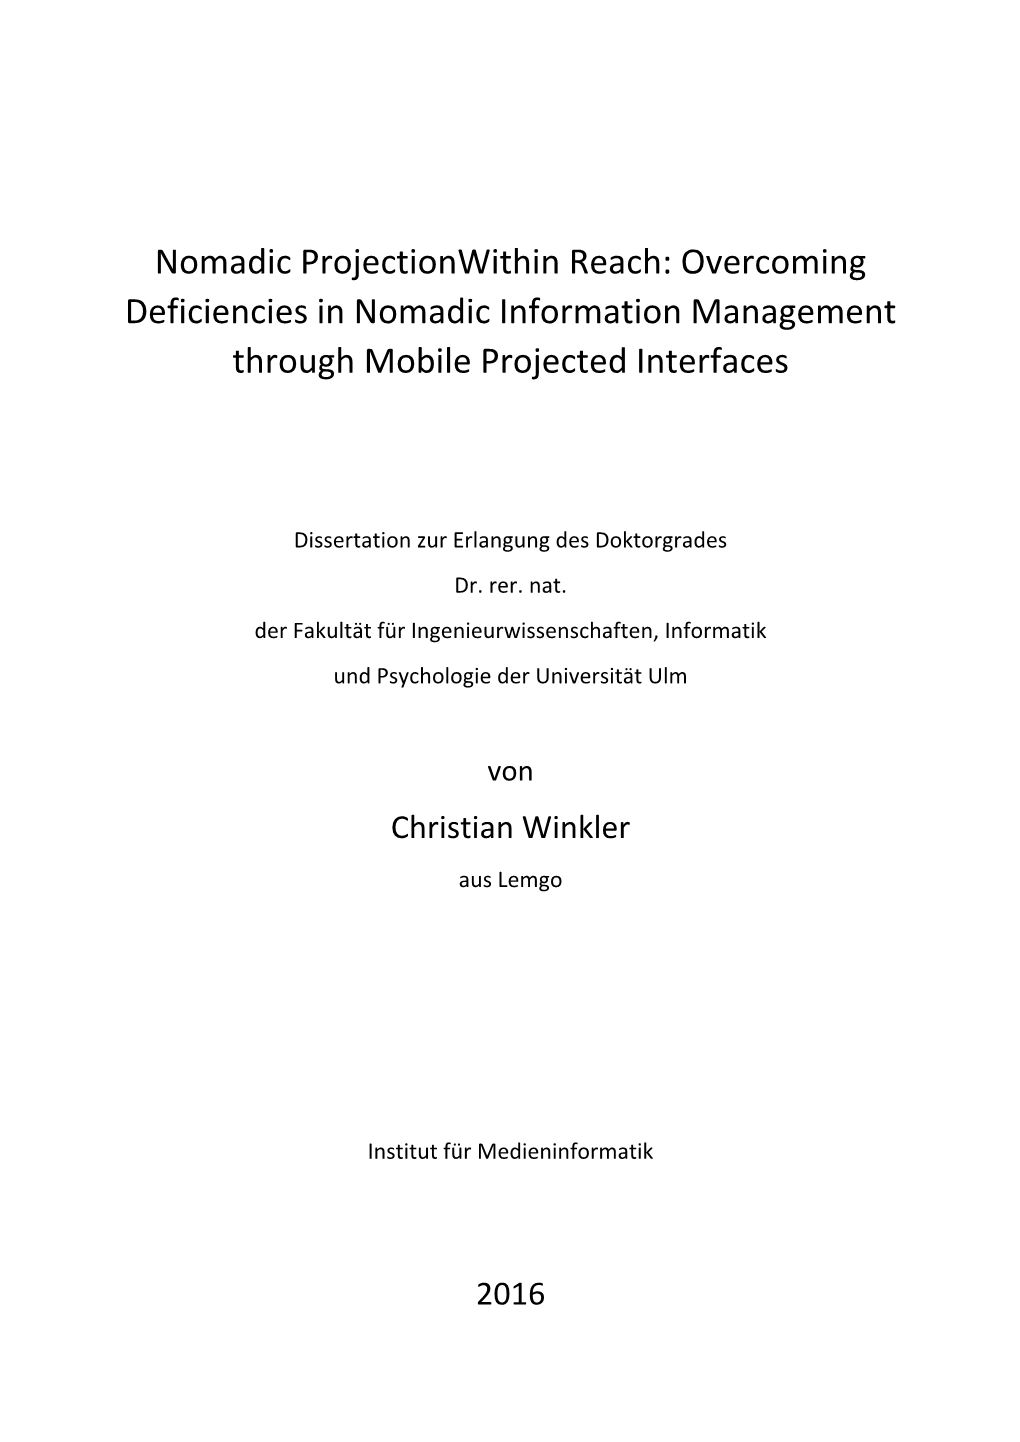 Overcoming Deficiencies in Nomadic Information Management Through Mobile Projected Interfaces